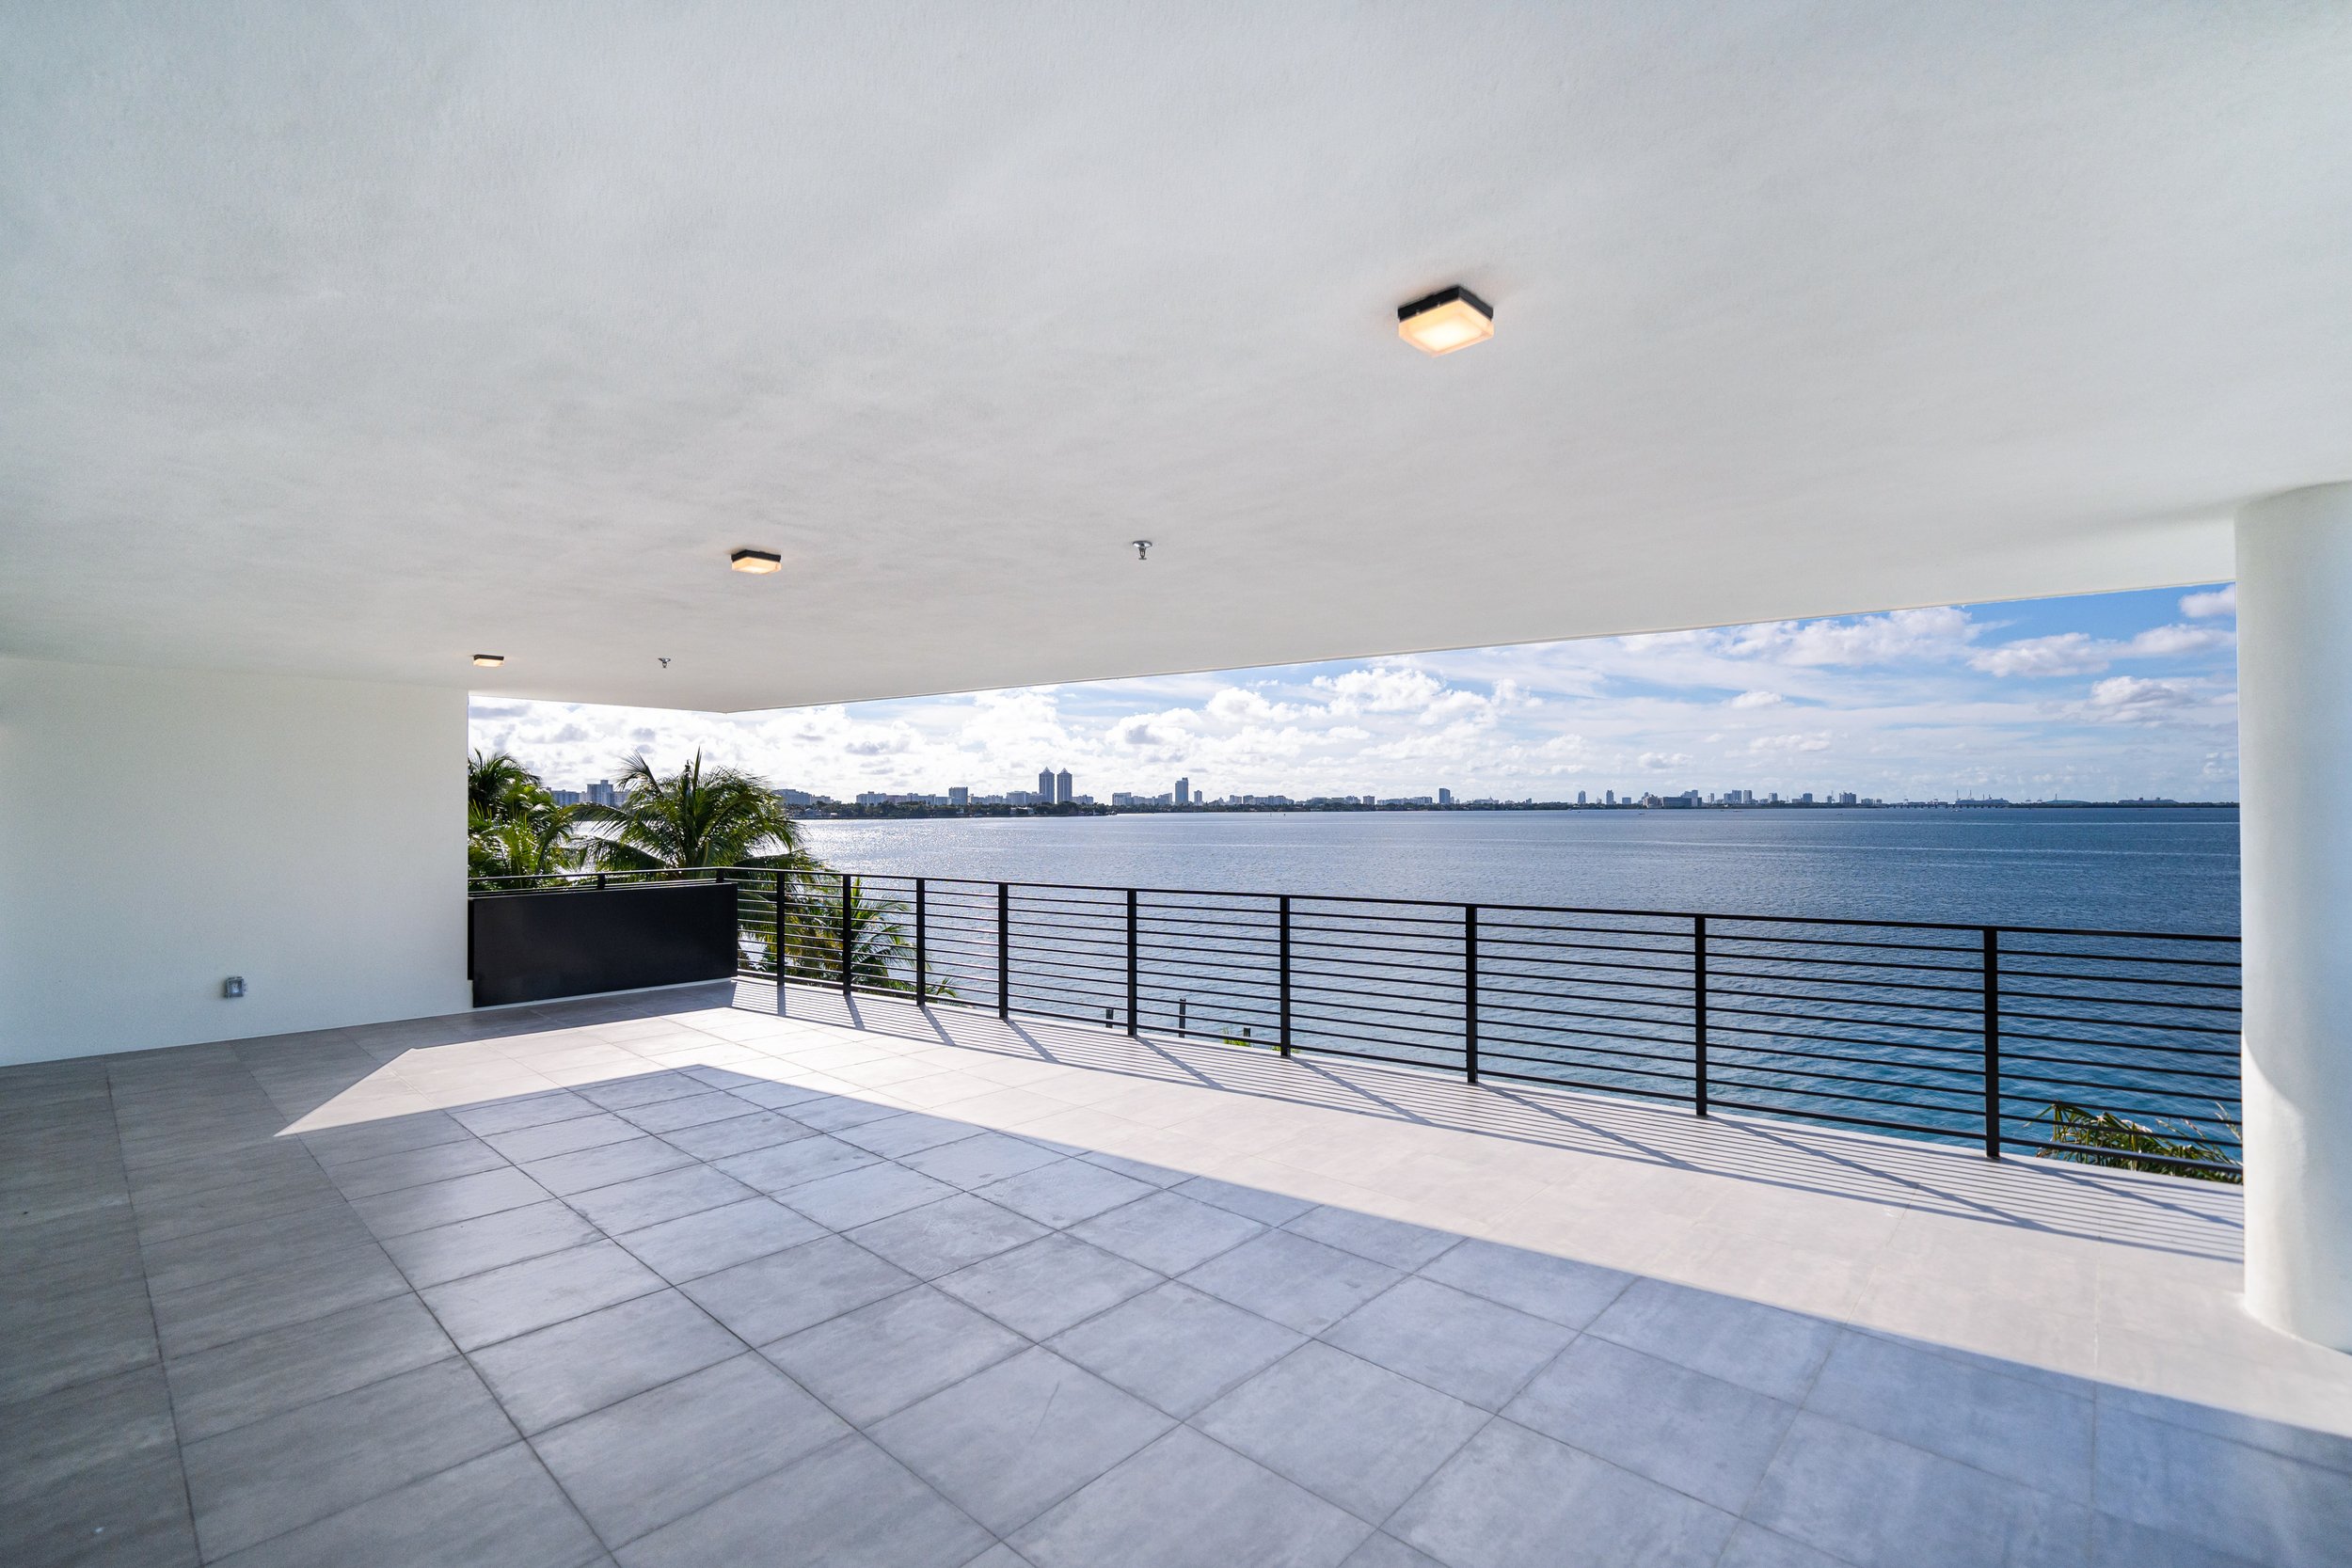 Sabal Development Sells Newly Constructed Luxury Waterfront Apartment Building On Miami Beach's Isle of Normandy 131.jpg